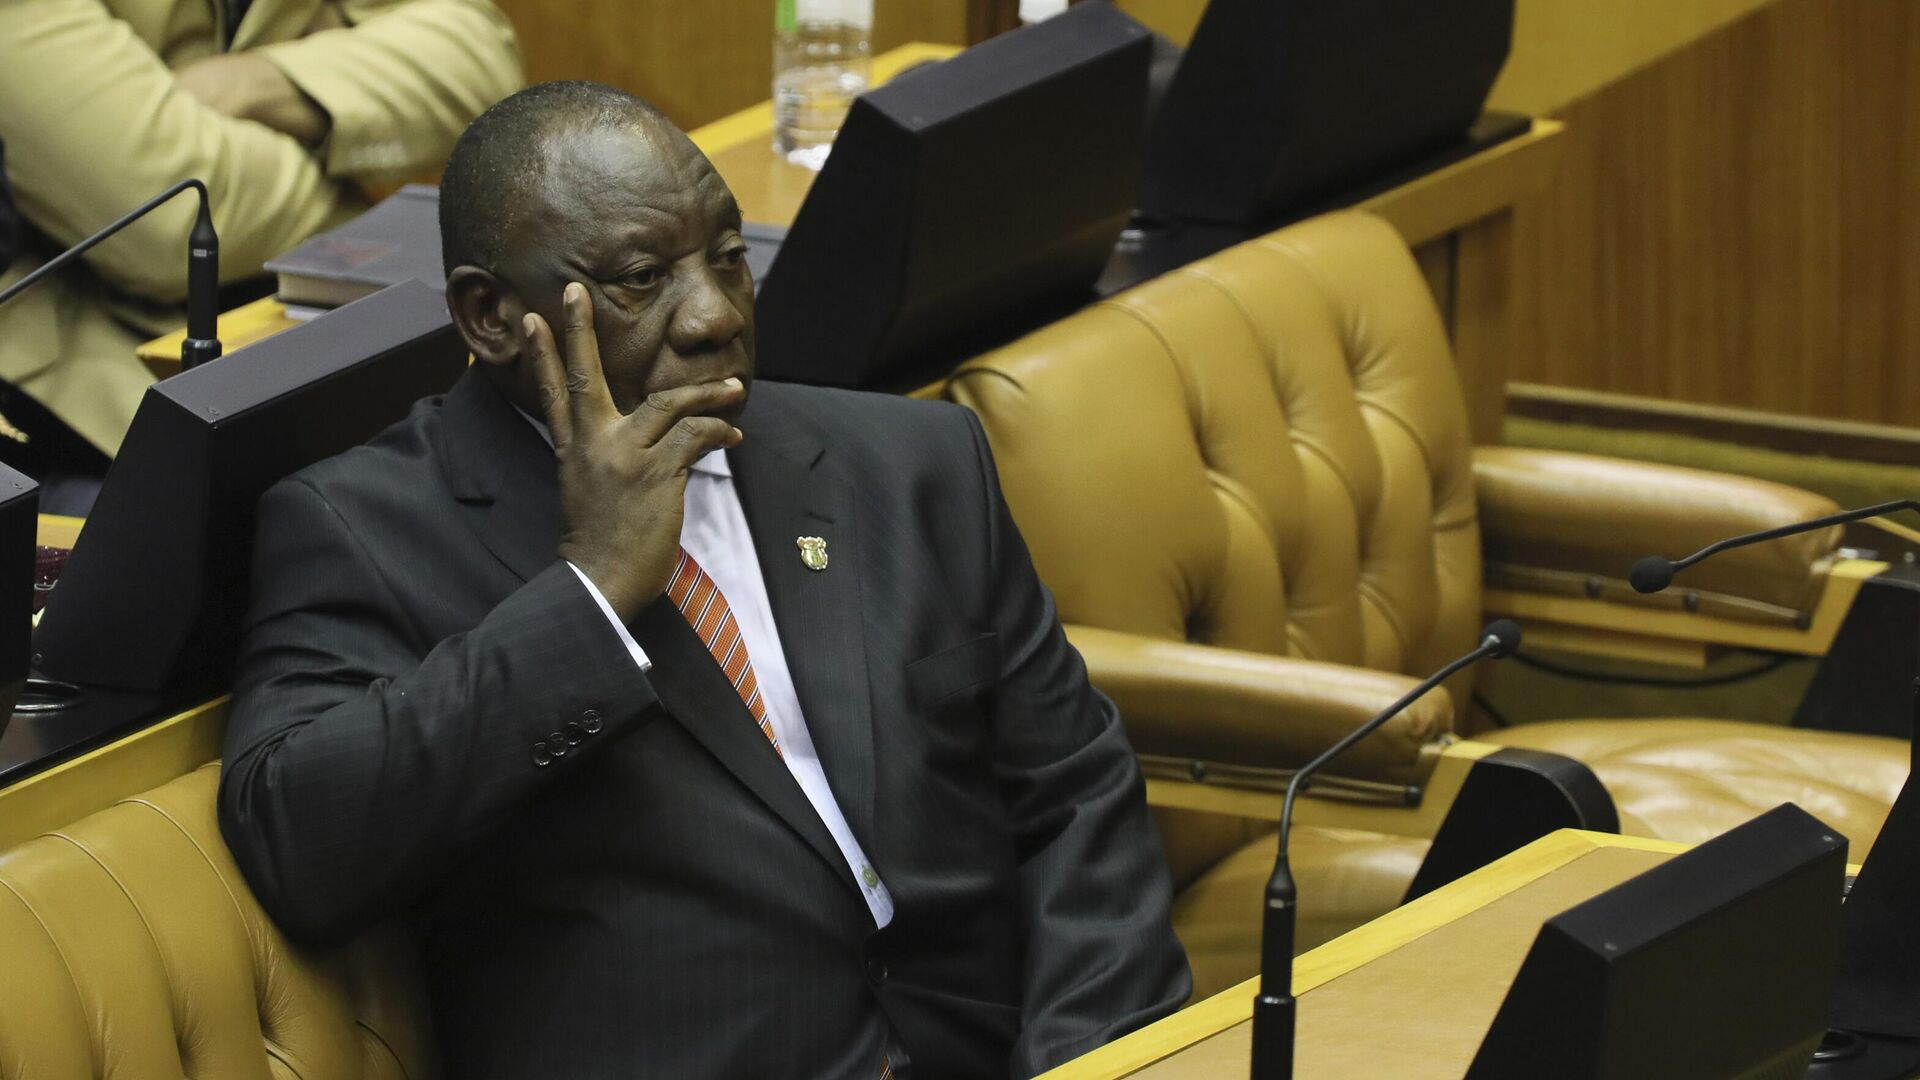 South African President Cyril Ramaphosa waits as members of the Economic Freedom Fighters (EFF) party disrupt parliament proceedings at the State of the Nation Address in Cape Town, South Africa, Thursday, Feb. 13, 2020. - Sputnik International, 1920, 30.03.2022